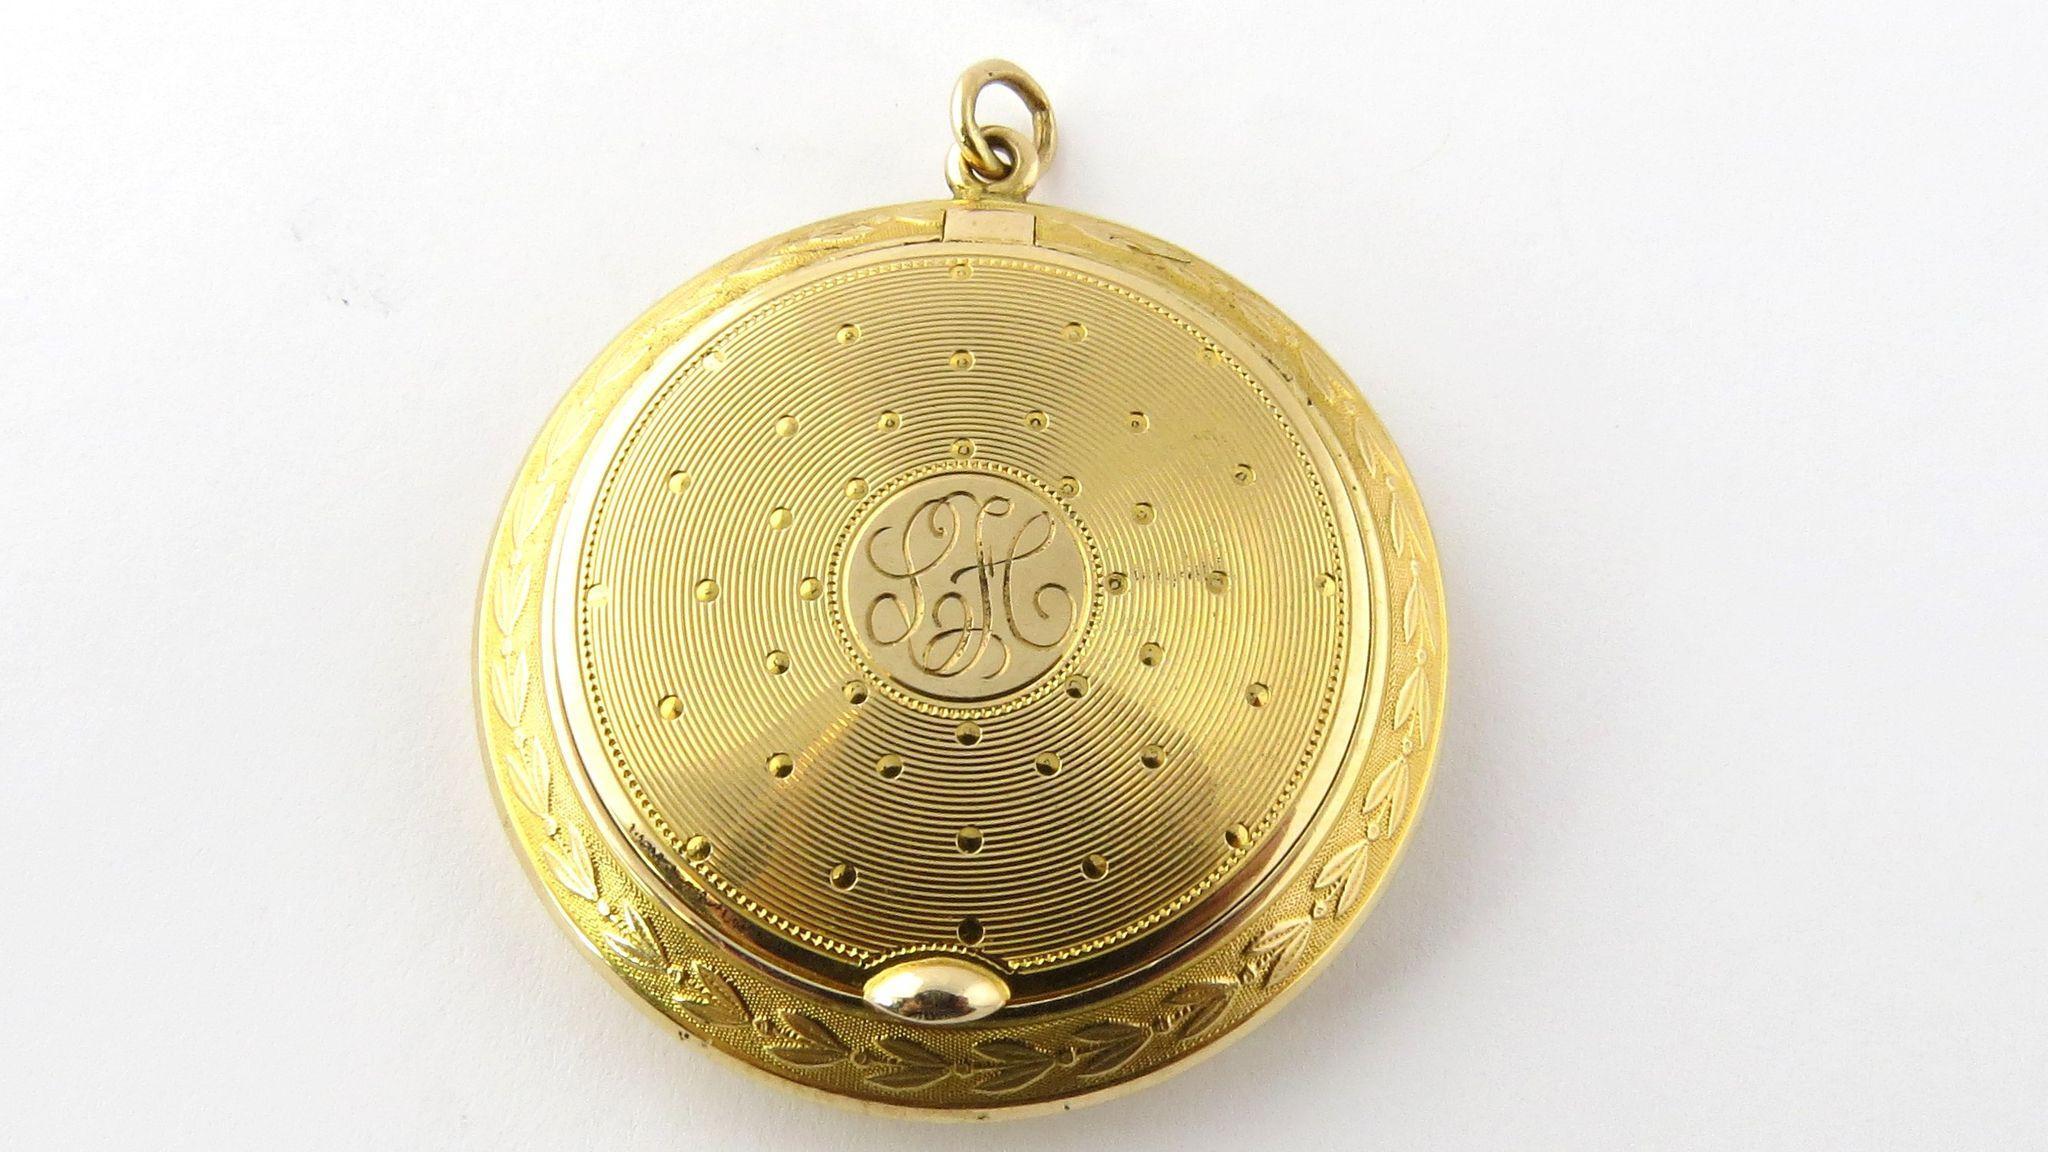 Antique 14K Yellow Gold Locket / Compact Snuff Box Pendant with Engine Turned Design circa 1900 - 1910

Front cover has monogram engraved LFC - this could be removed if requested 

1 11/16